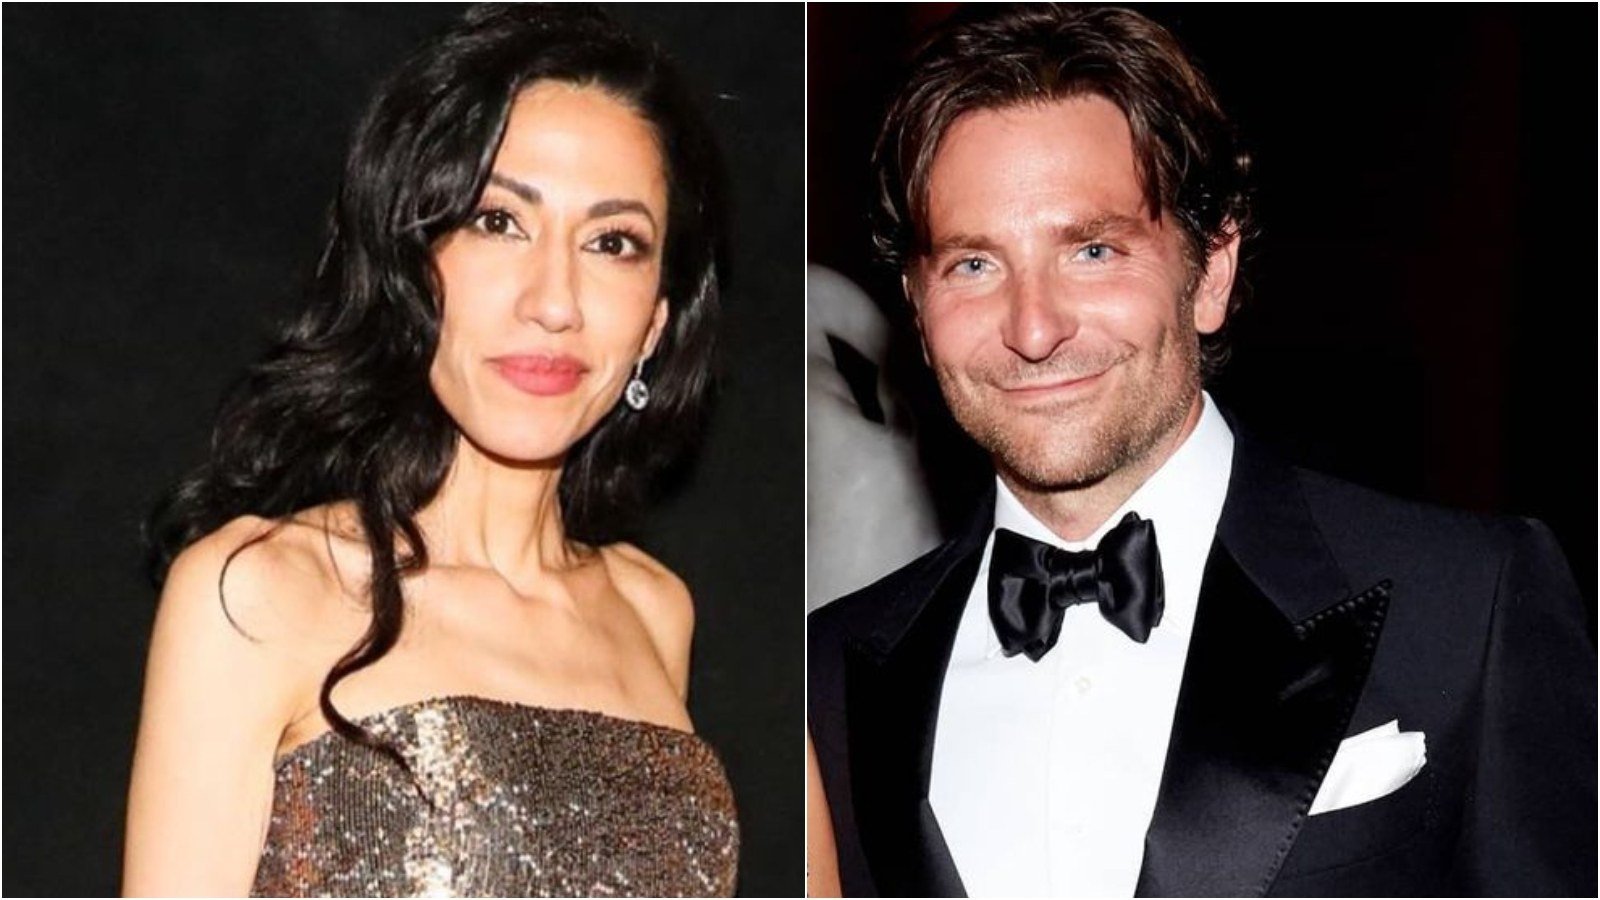 Huma Abedin is a long-time aide to Hillary Clinton, while Bradley Cooper is a household name thanks to his Hollywood films. Photos: @marieclairerussia; @humaabedin/Instagram